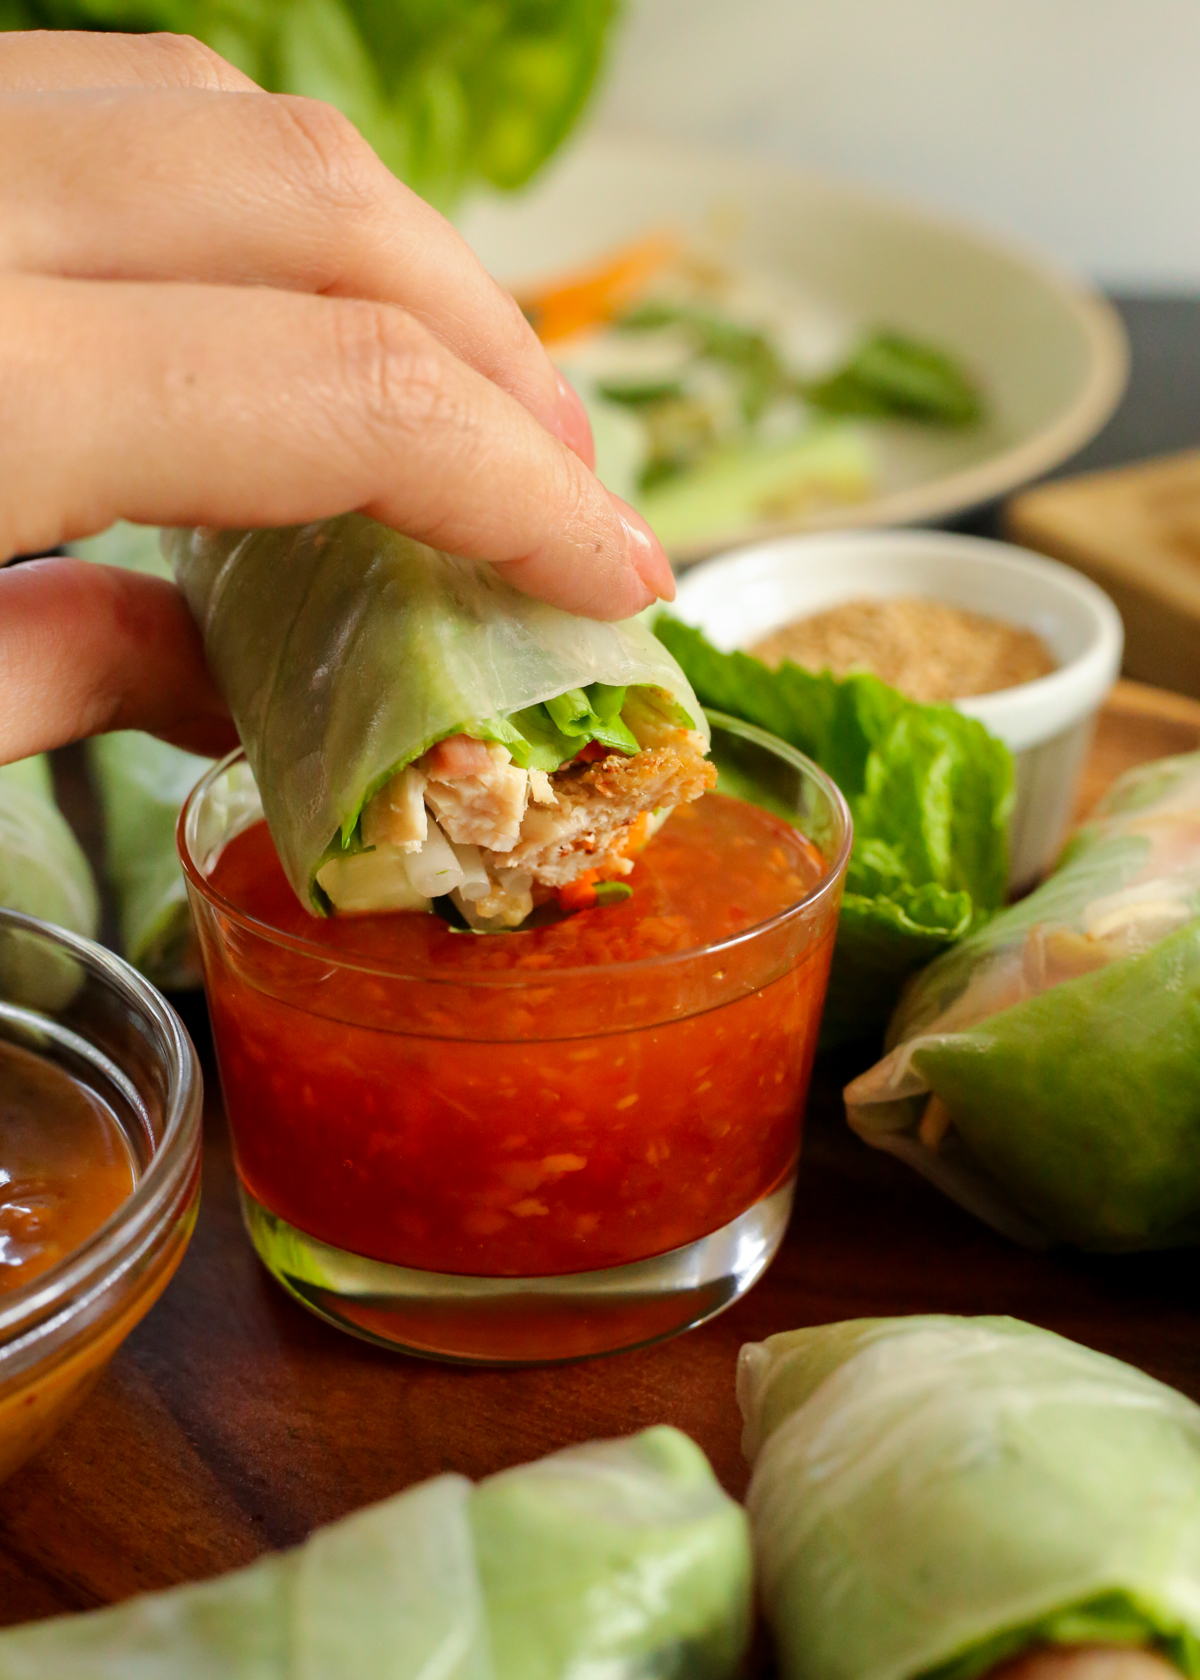 A woman's hand holds a turkey spring roll and dips it into a sweet chili sauce served in a small clear glass ramekin, with additional spring rolls and garnishes in the background